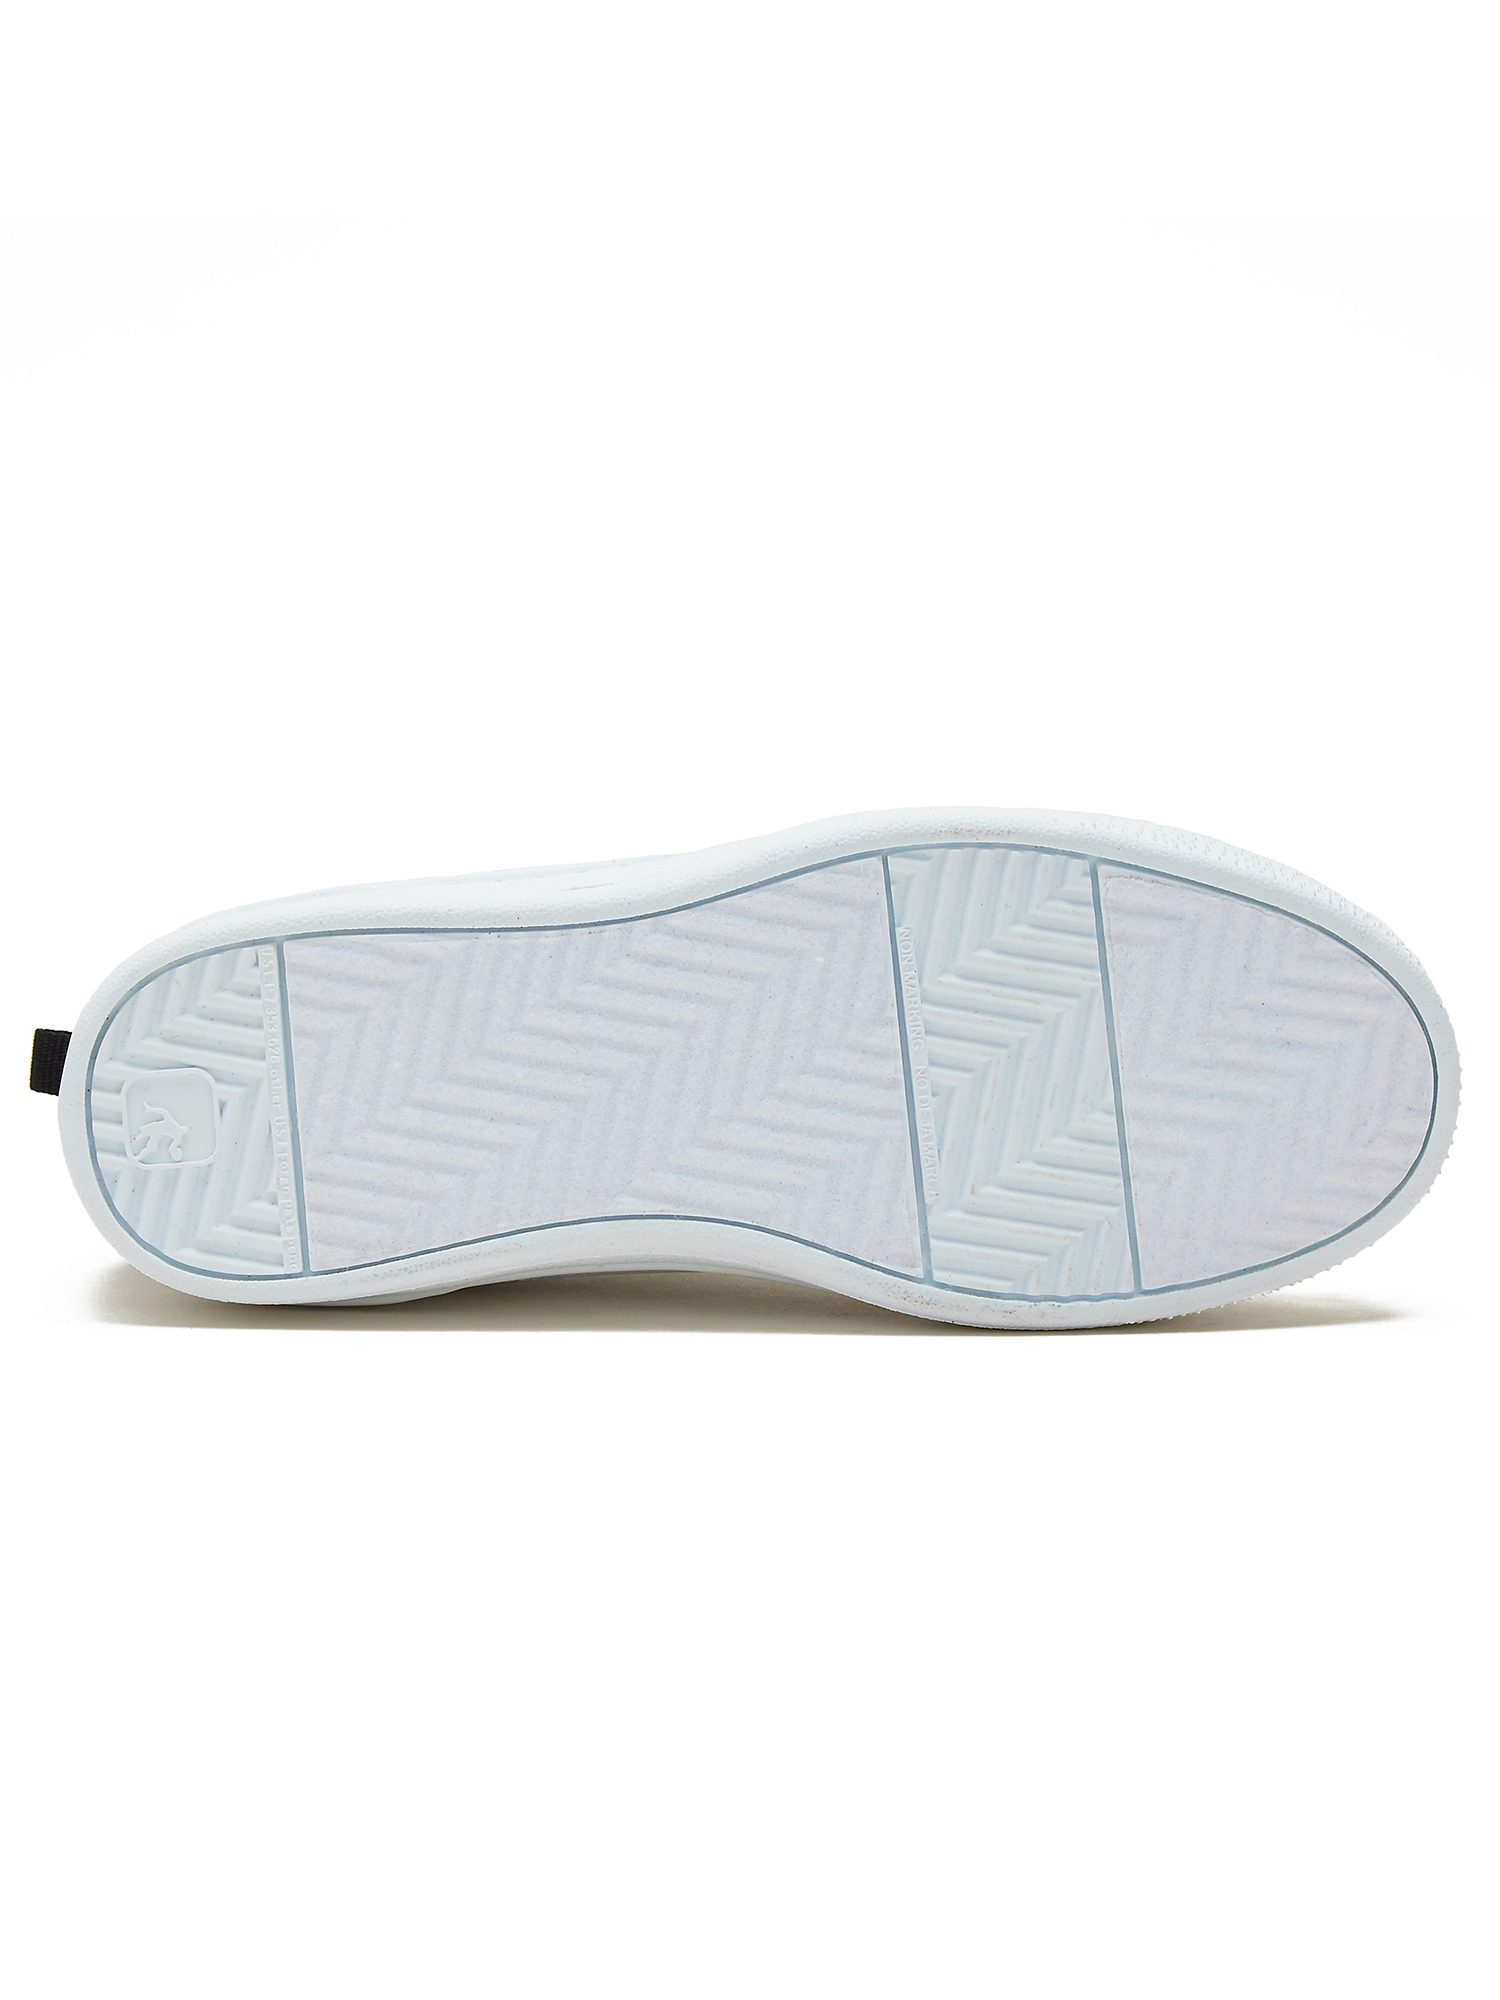 Boys' Meister Casual Court Shoe - image 5 of 5